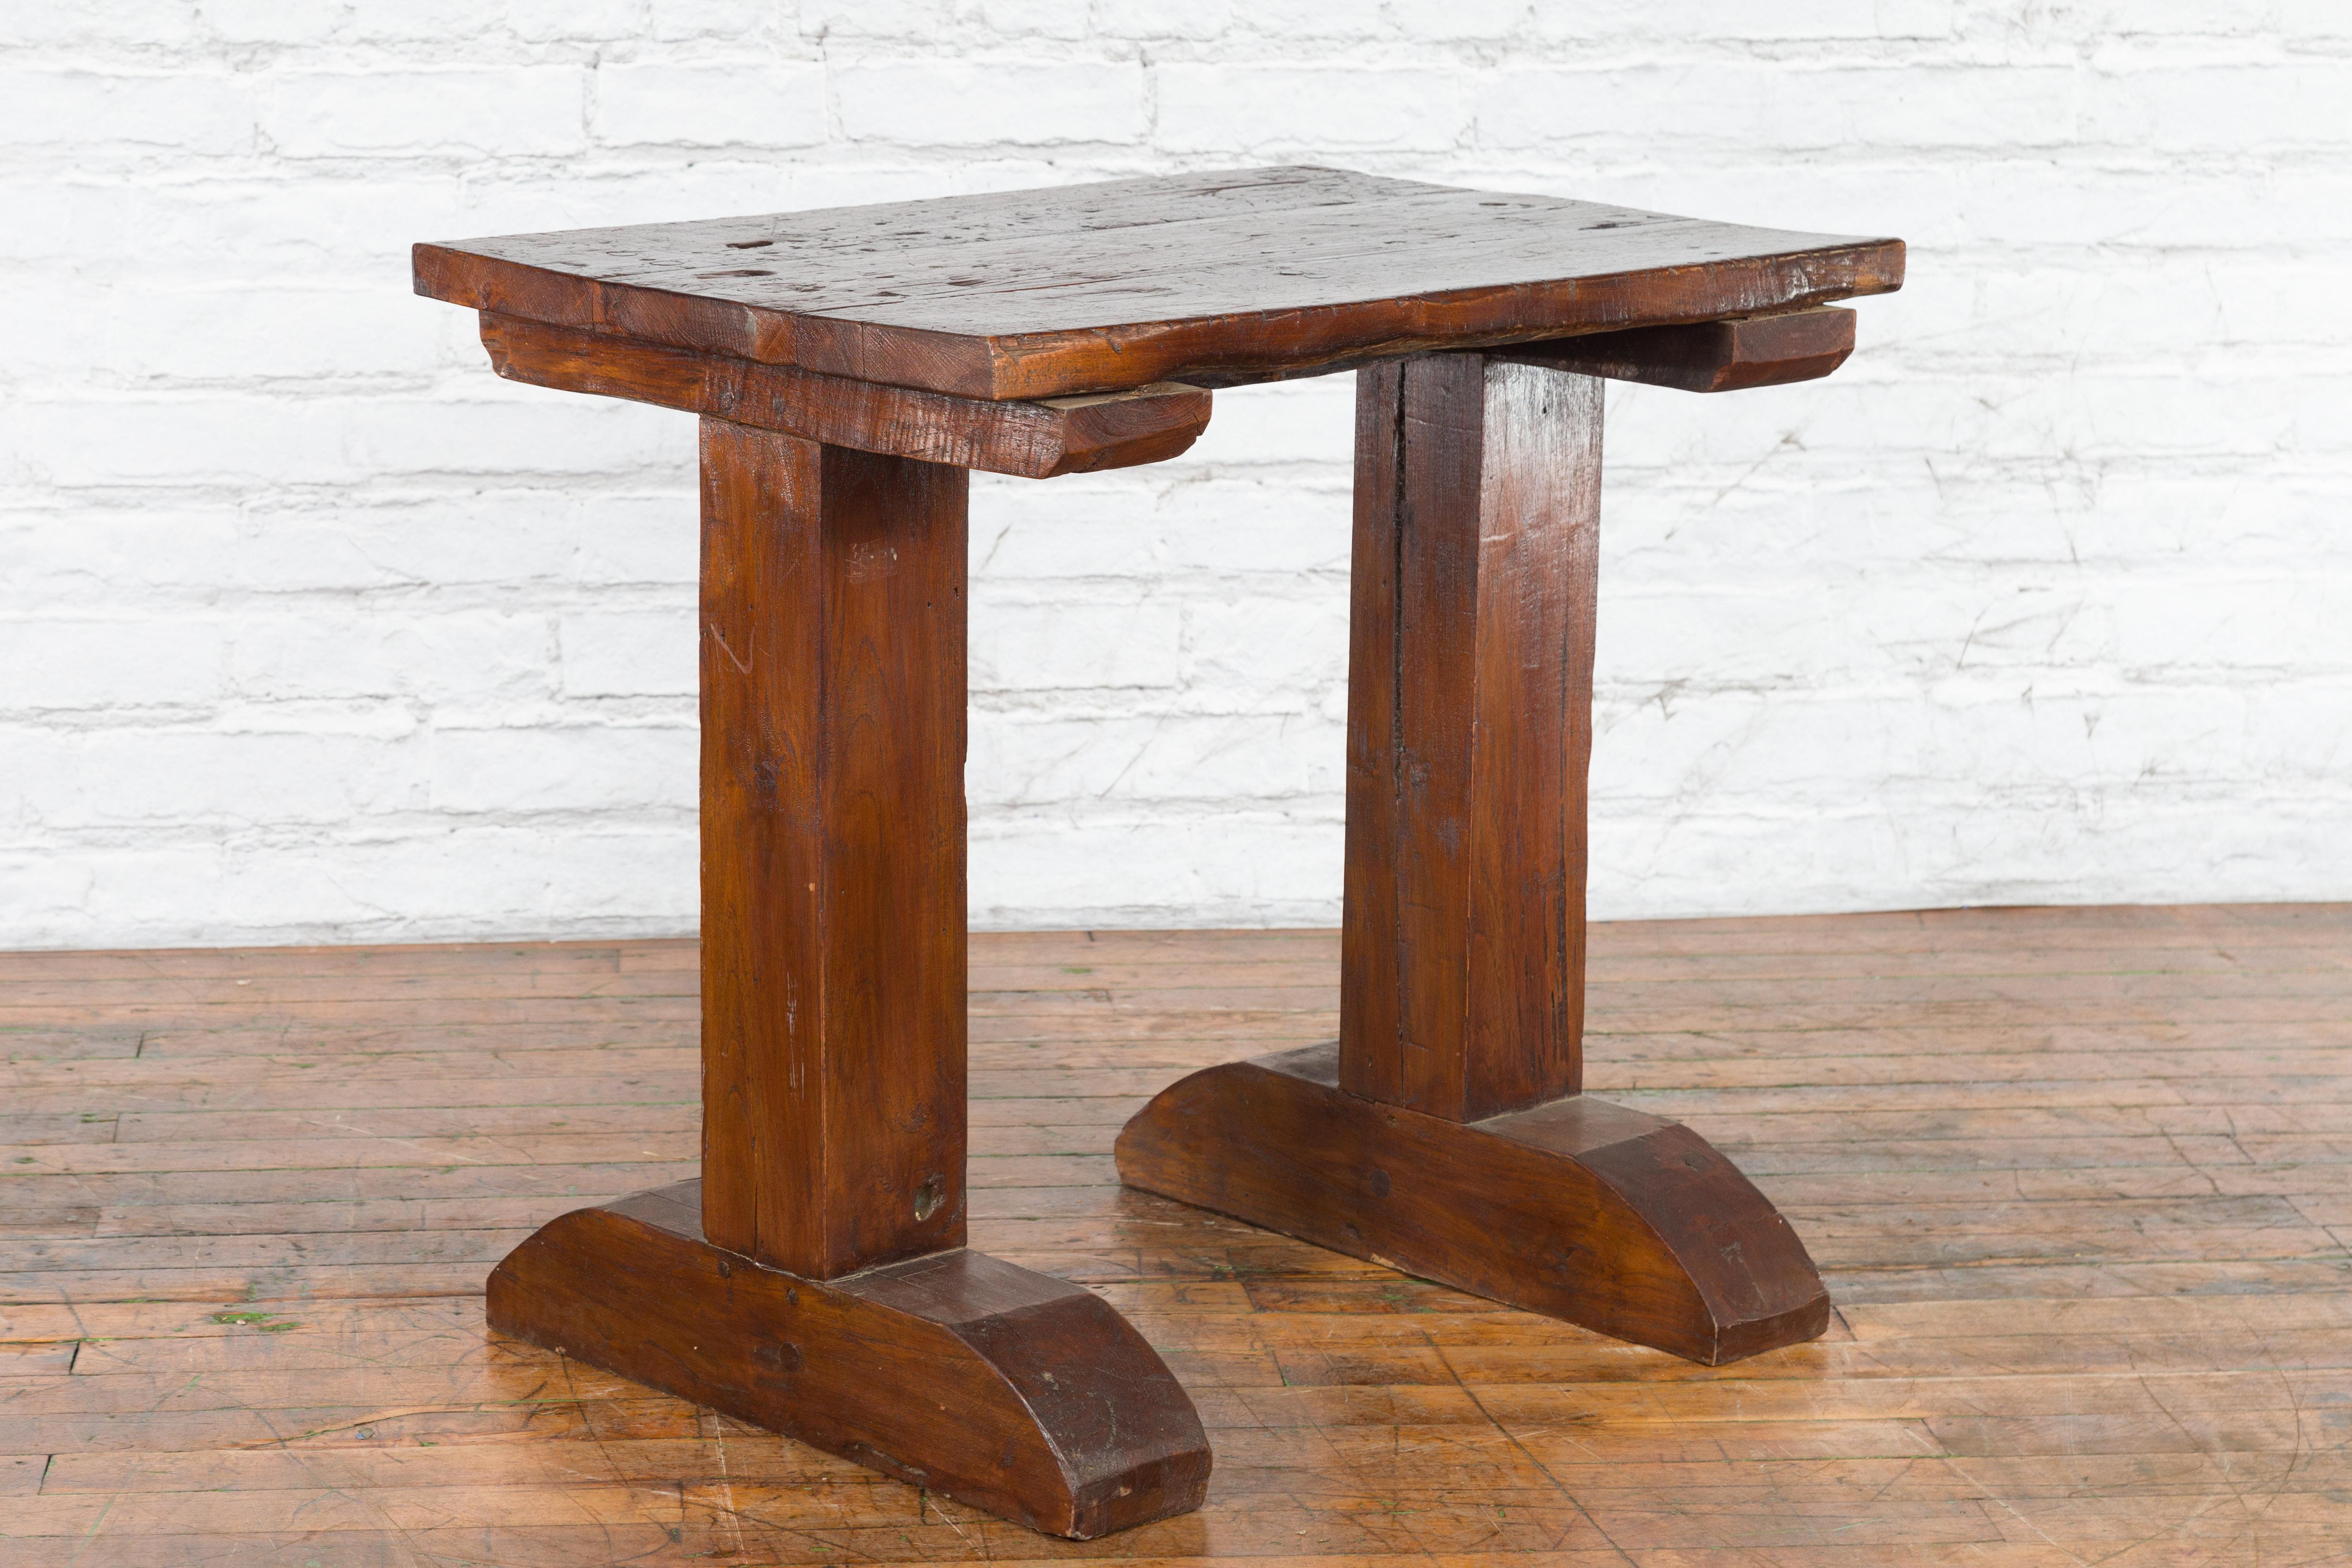 An antique Indonesian wooden wine tasting table from the 19th century, with rustic appearance. Created in Indonesia during the 19th century, this wine tasting table features a rectangular planked top with nicely worn patina, sitting above a trestle